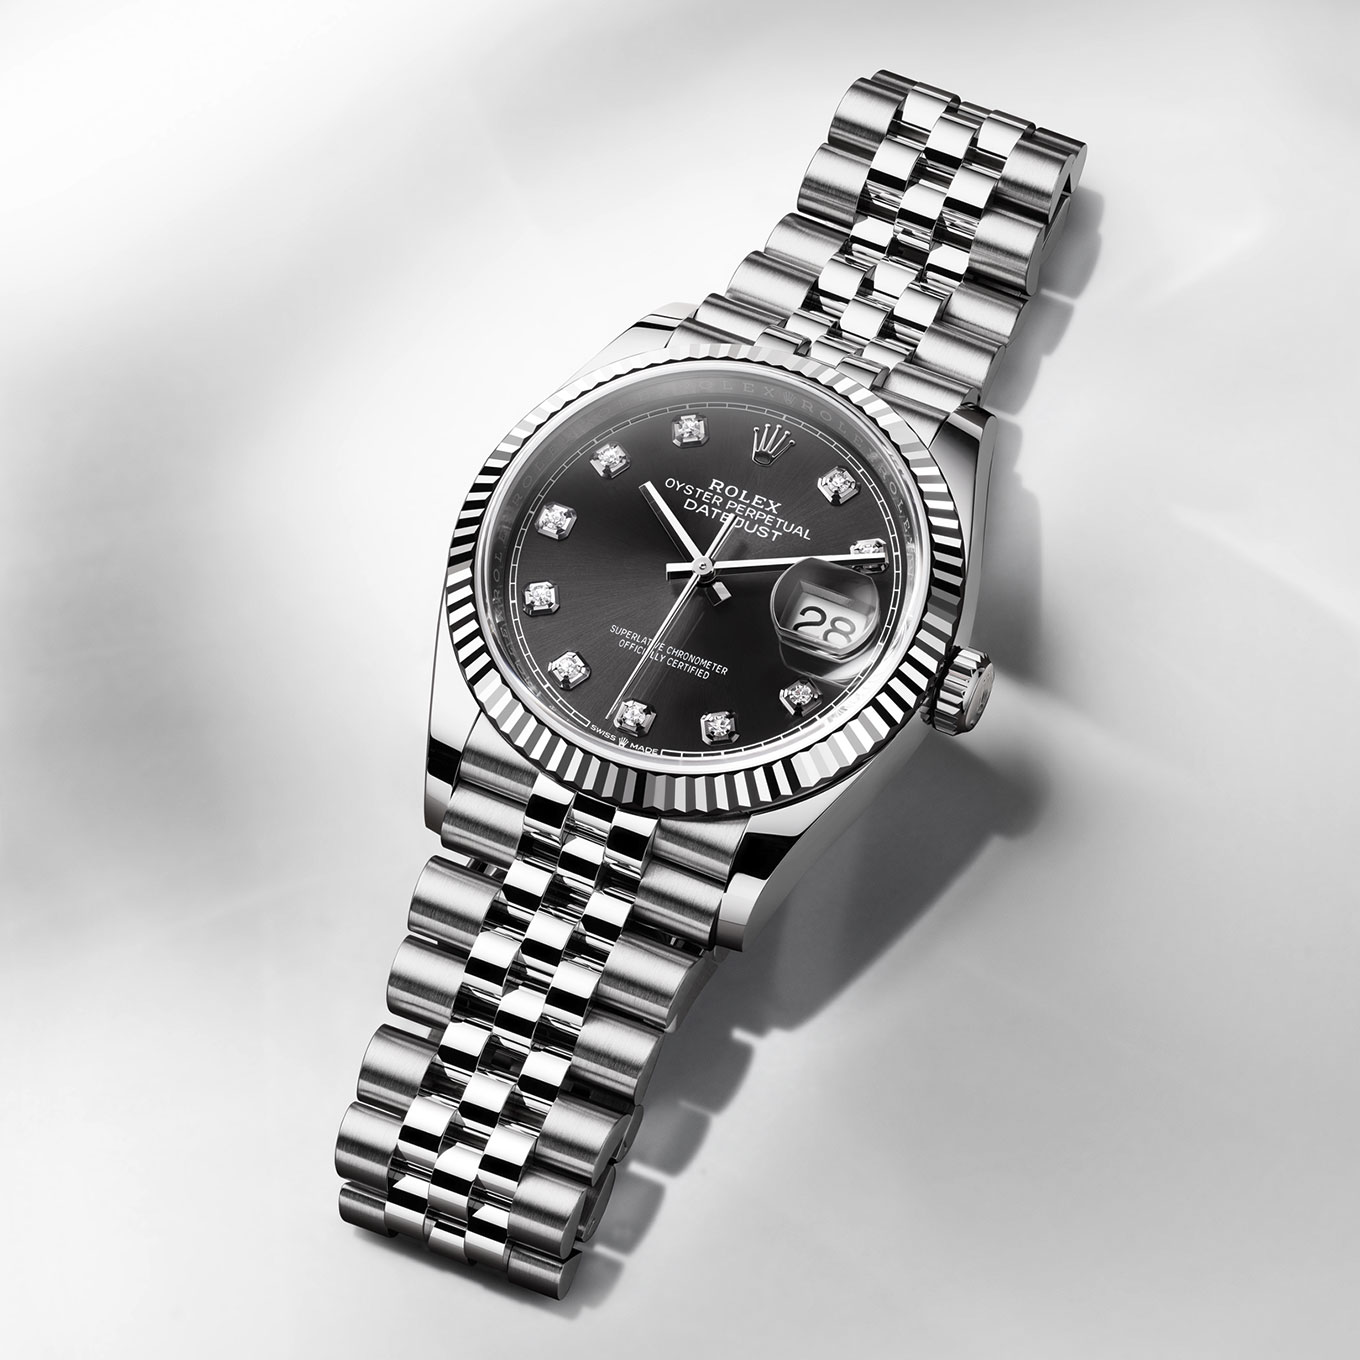 Rolex Datejust - Timeless style